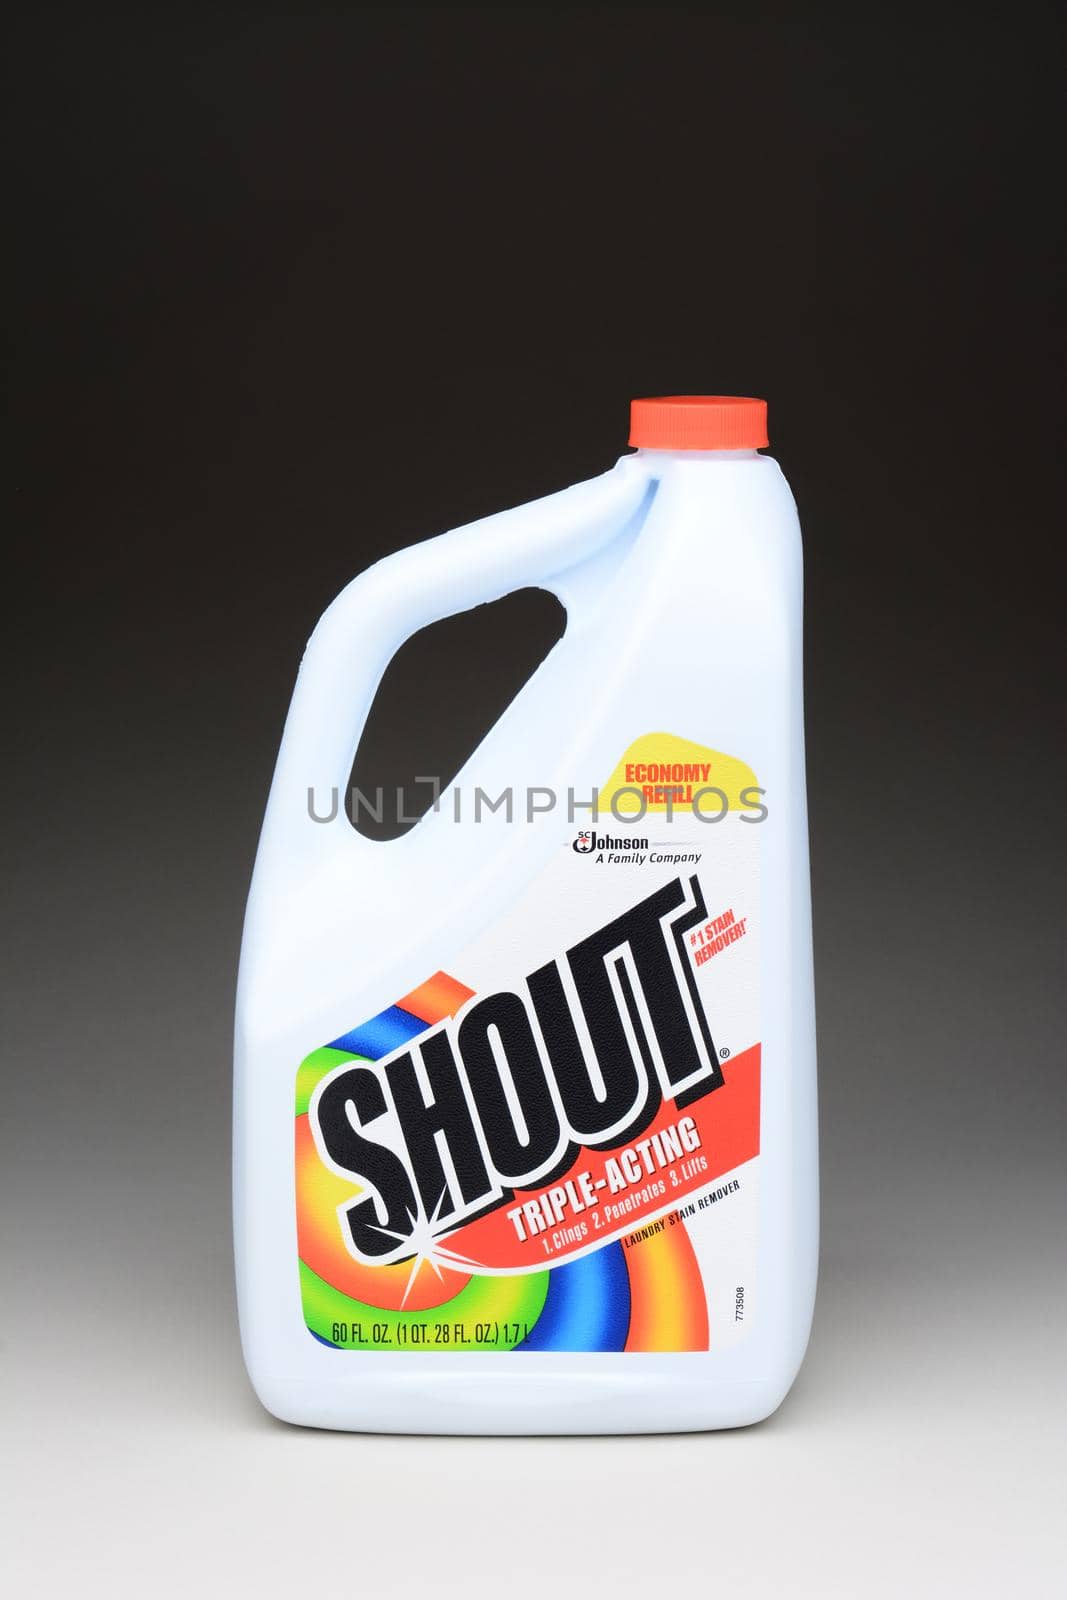 IRVINE, CA - January 11, 2013: A 60 oz refill bottle of Shout Laundry Stain Remover. Shout products are designed to help remove stains from clothing.